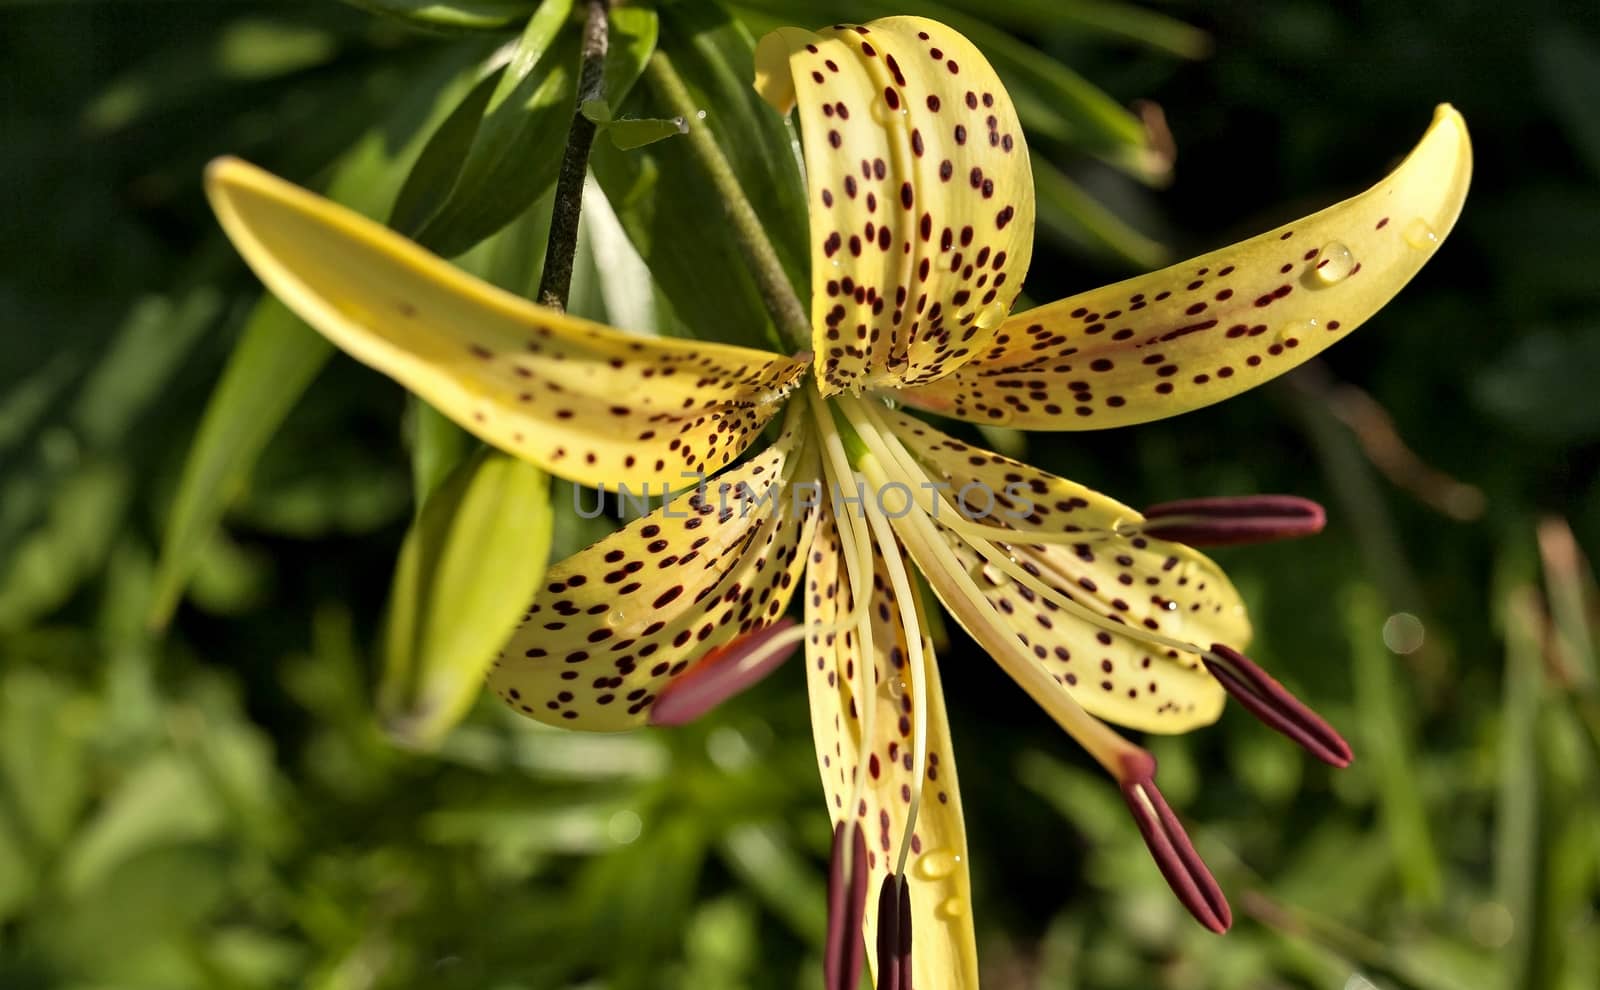 blooms yellow tiger Lily with dew drops on the petals by valerypetr